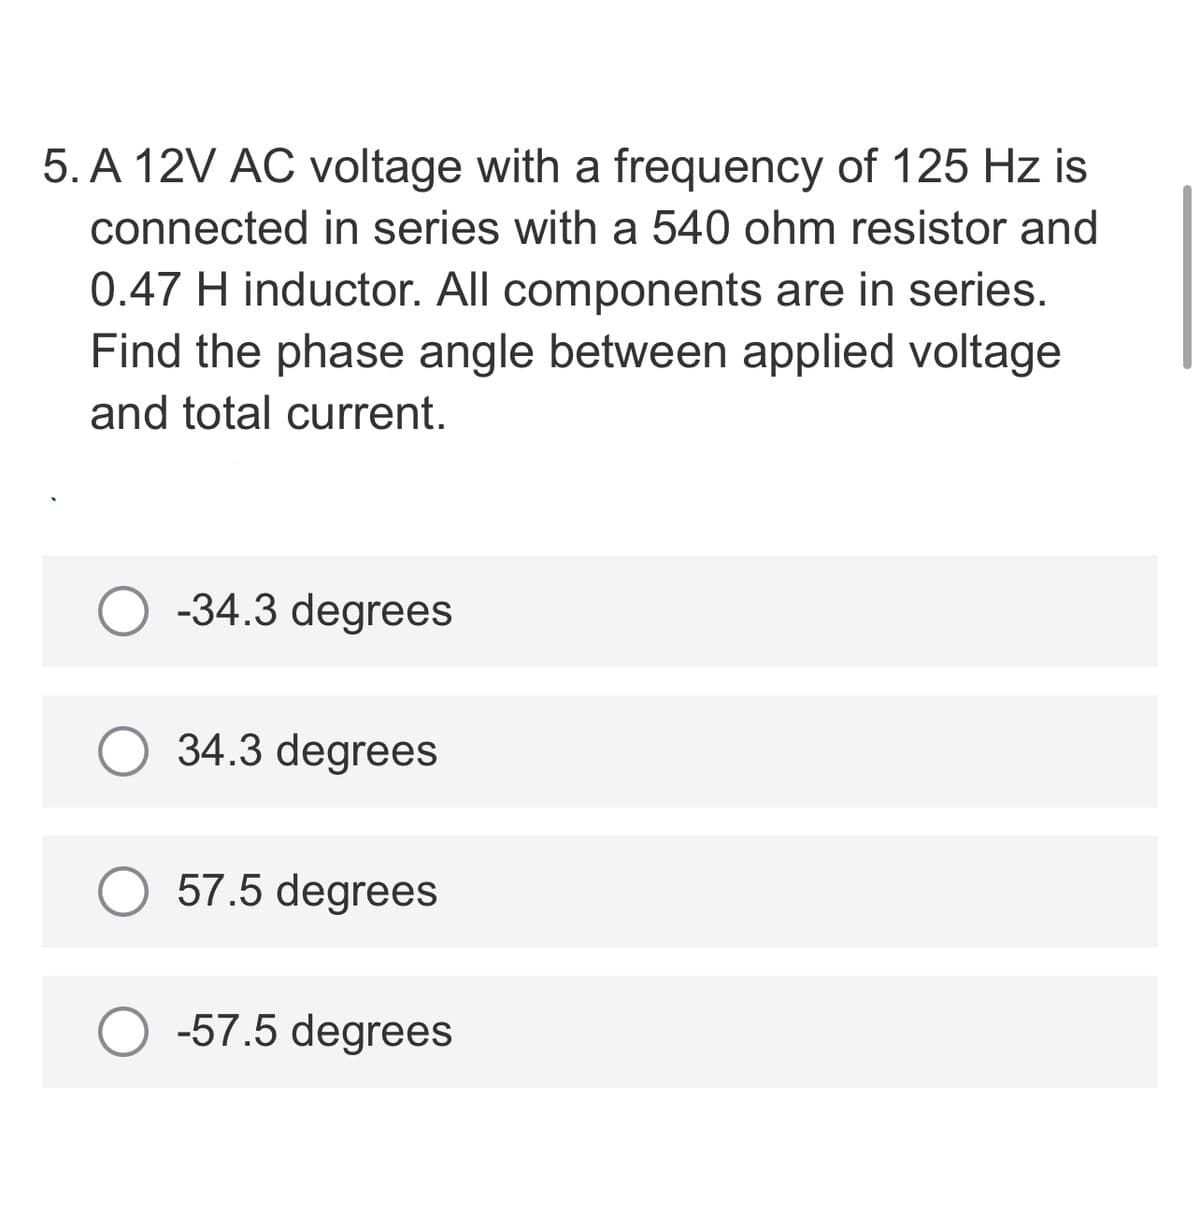 5. A 12V AC voltage with a frequency of 125 Hz is
connected in series with a 540 ohm resistor and
0.47 H inductor. All components are in series.
Find the phase angle between applied voltage
and total current.
-34.3 degrees
34.3 degrees
57.5 degrees
O -57.5 degrees
